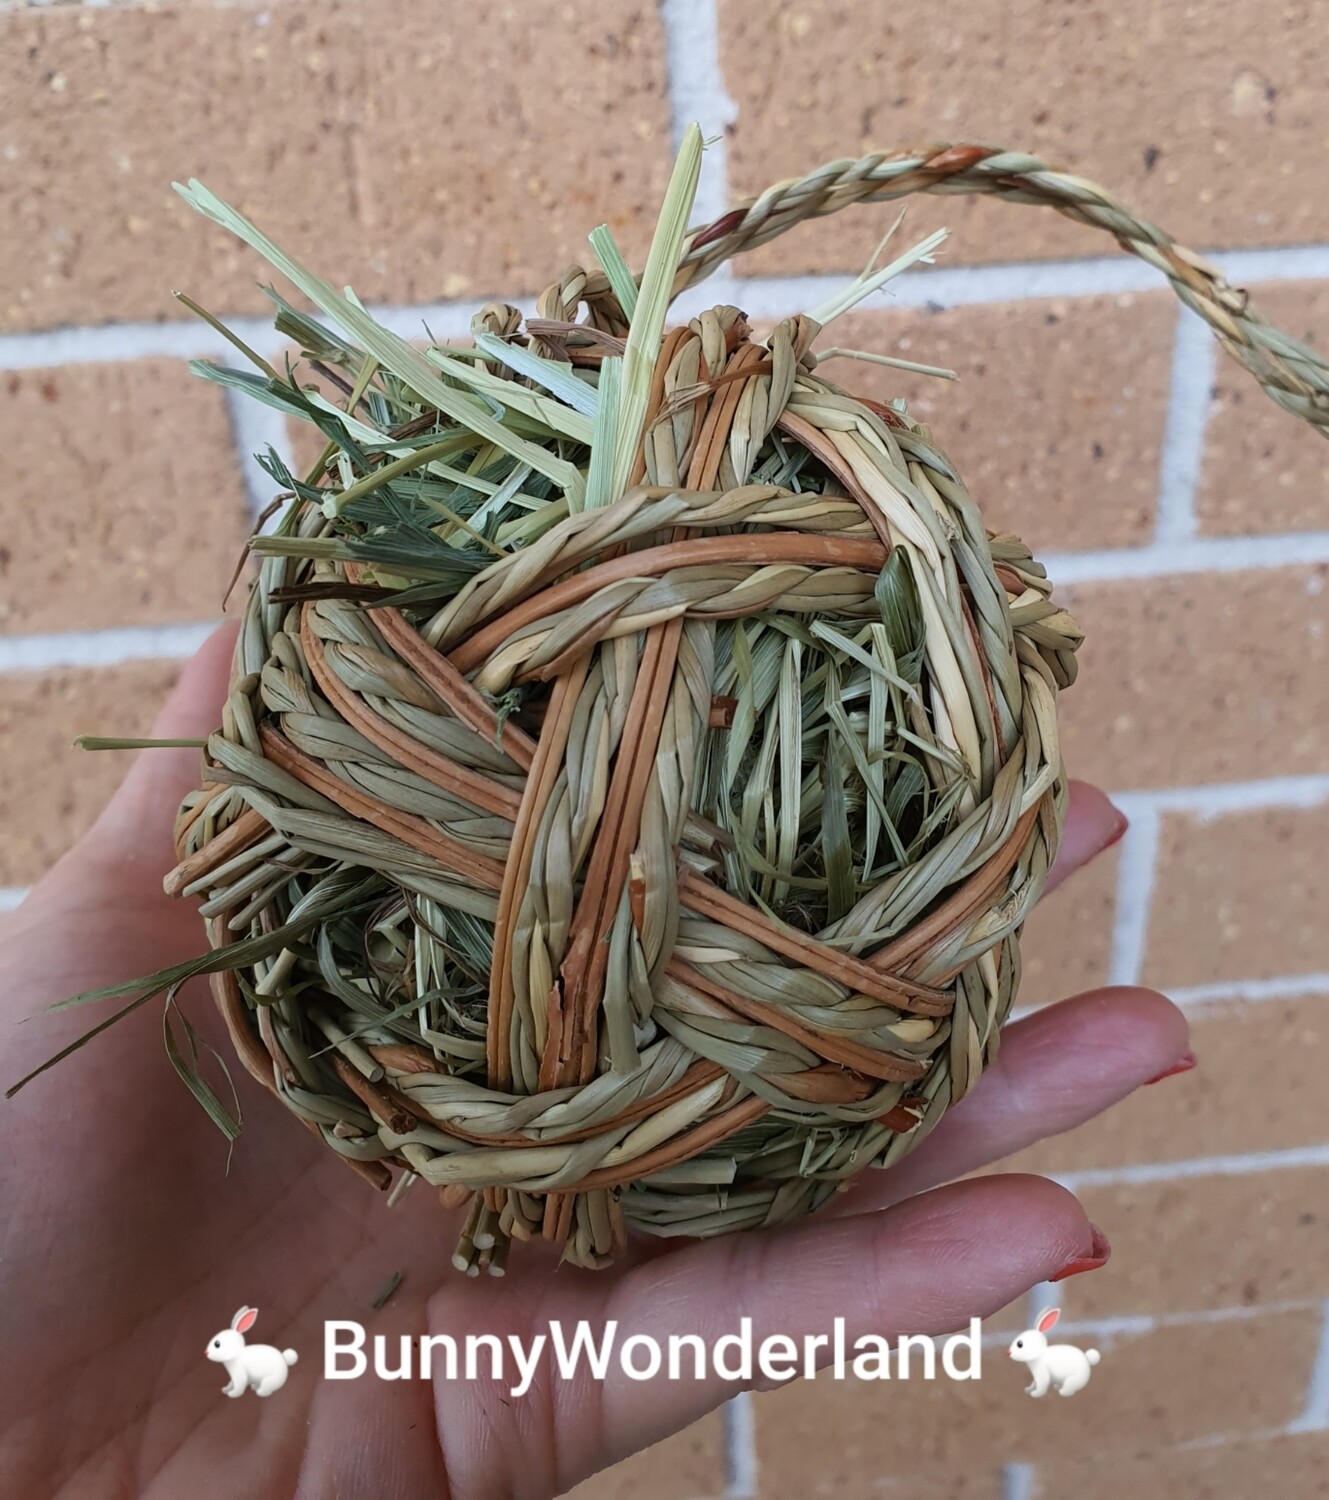 Braided + Willow Ball with Timothy Hay